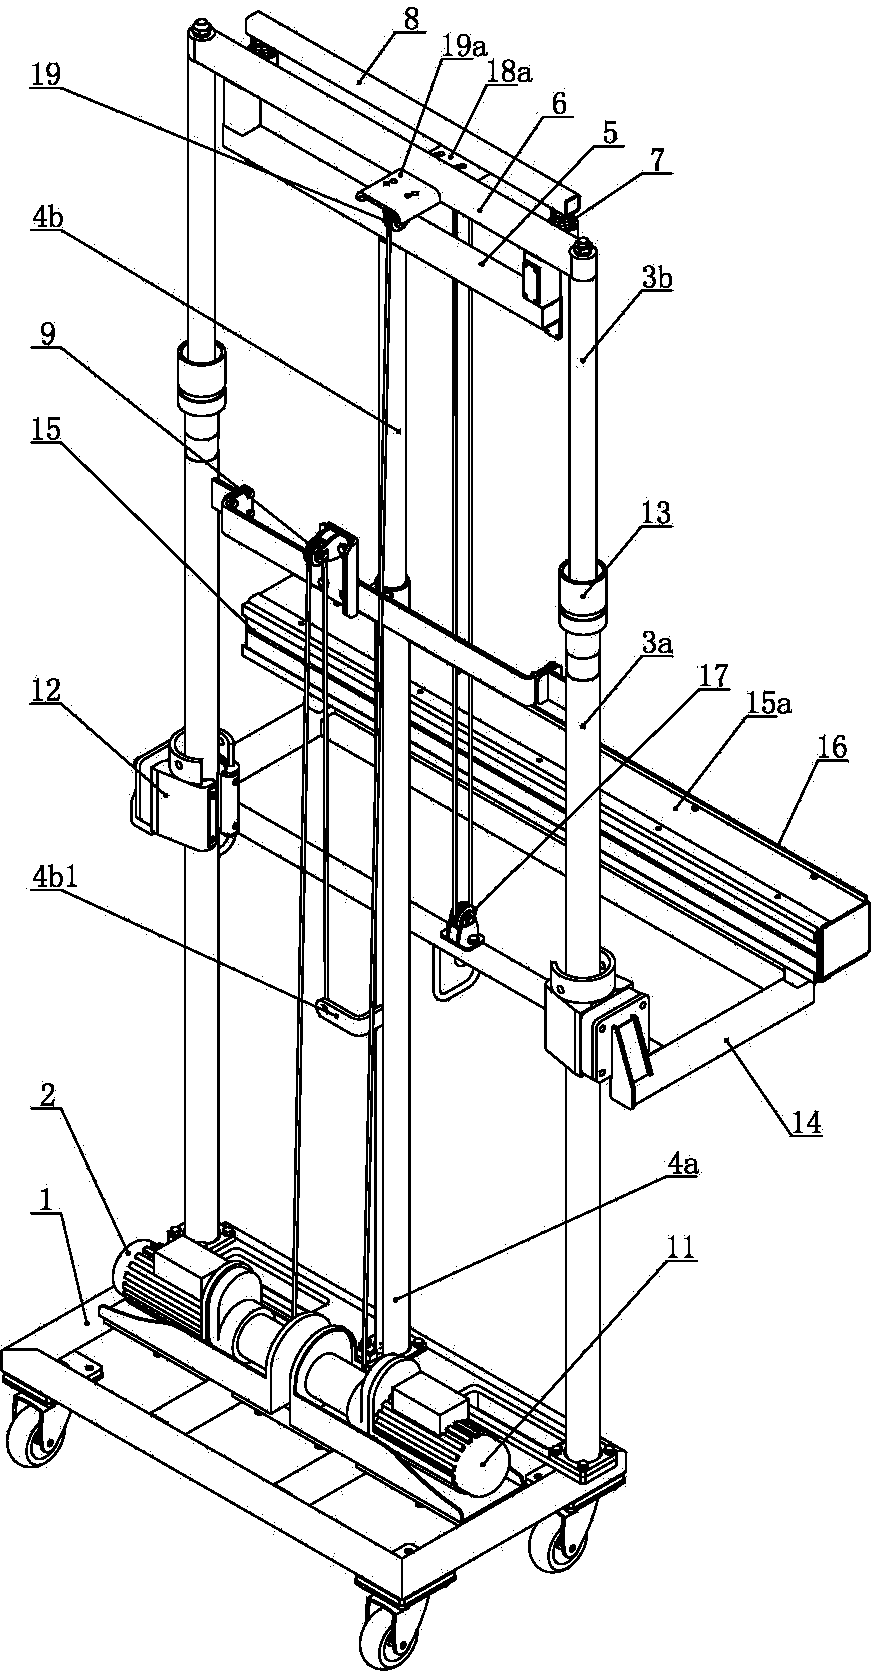 Mortar spraying and smearing machine and method for painting mortar on wall surface by using mortar spraying and smearing machine